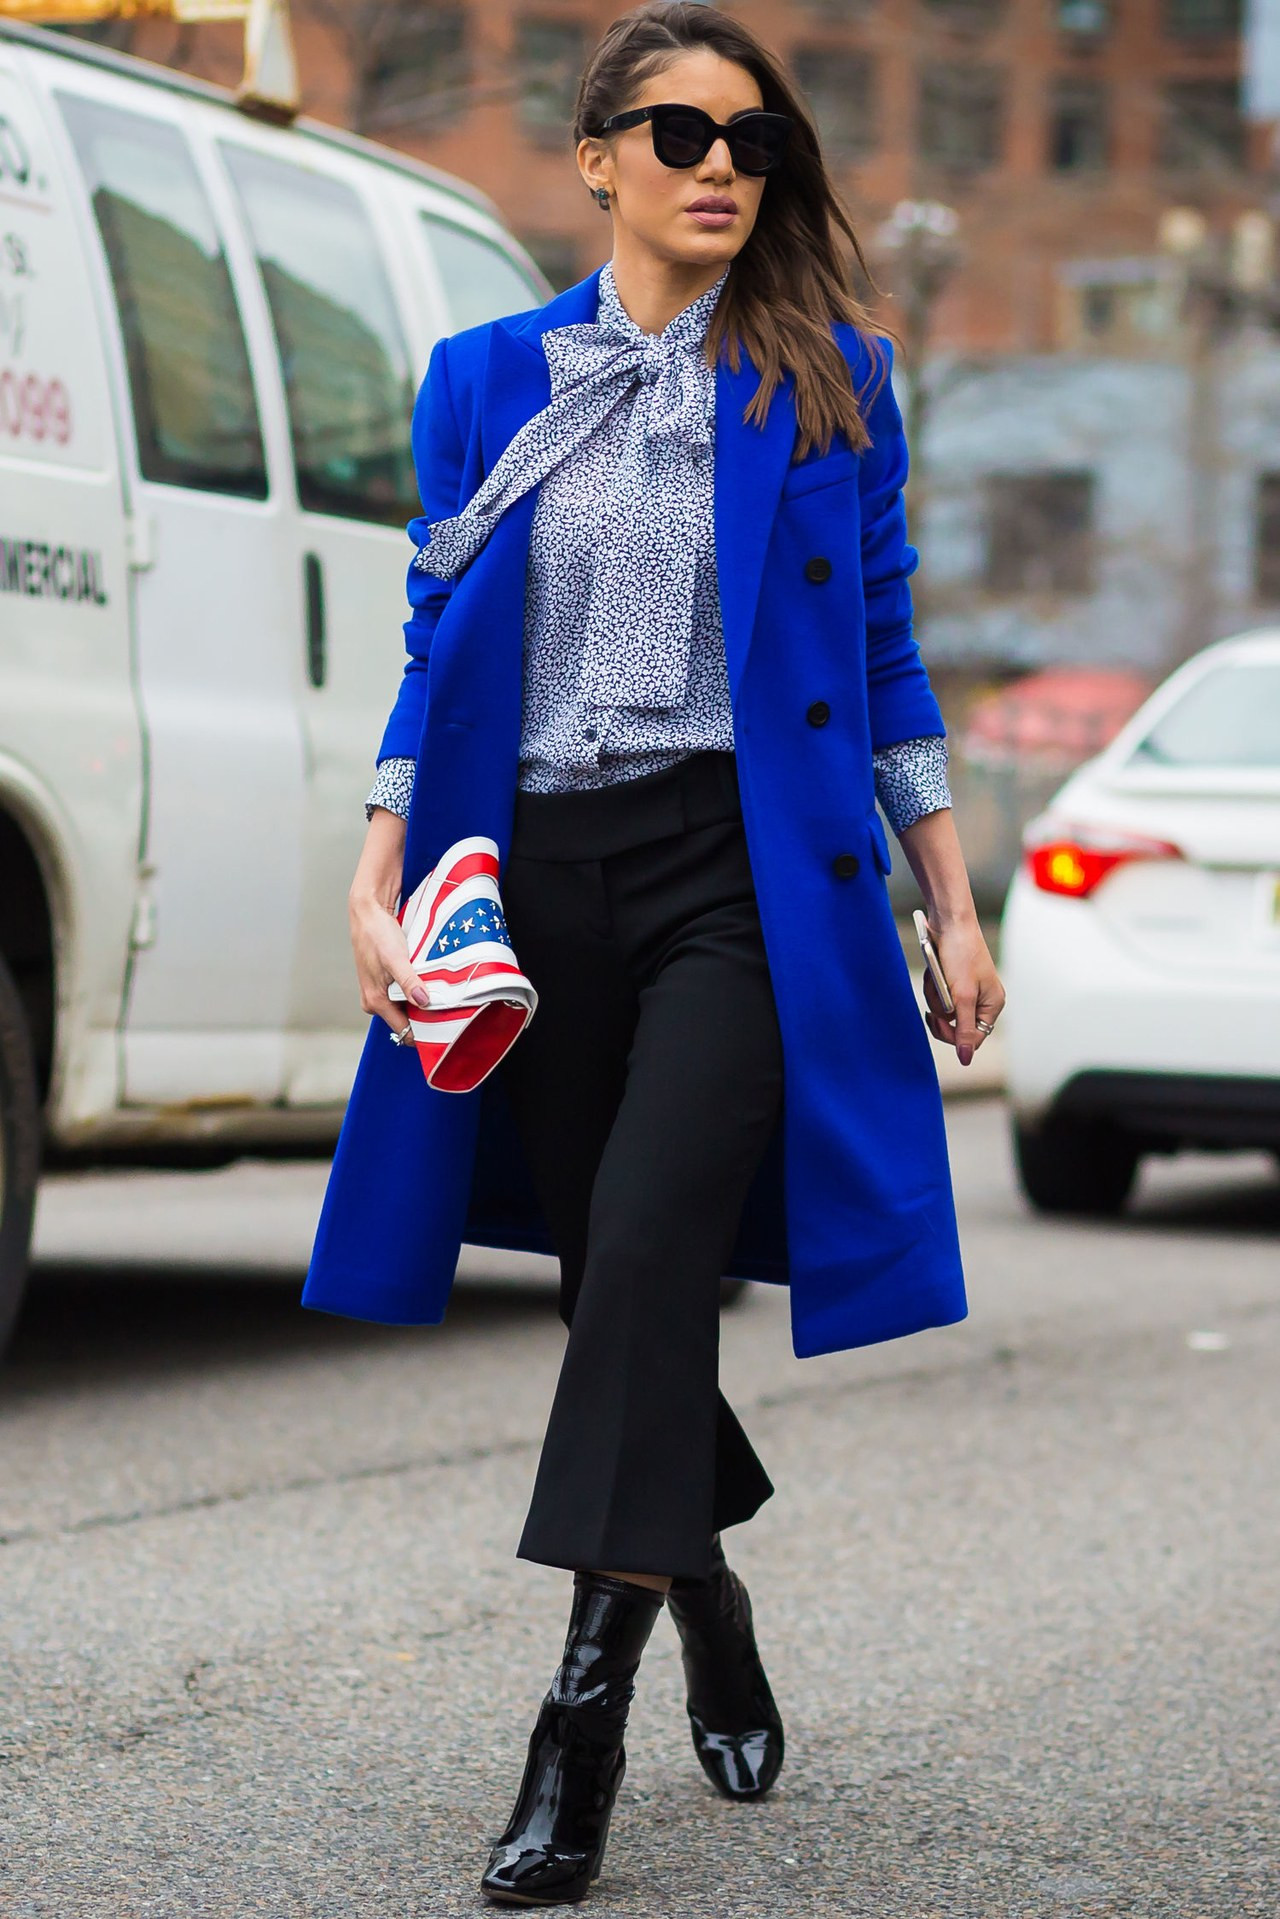 Spring Ideas For Work
 What to Wear to Work in Transitional Spring Weather